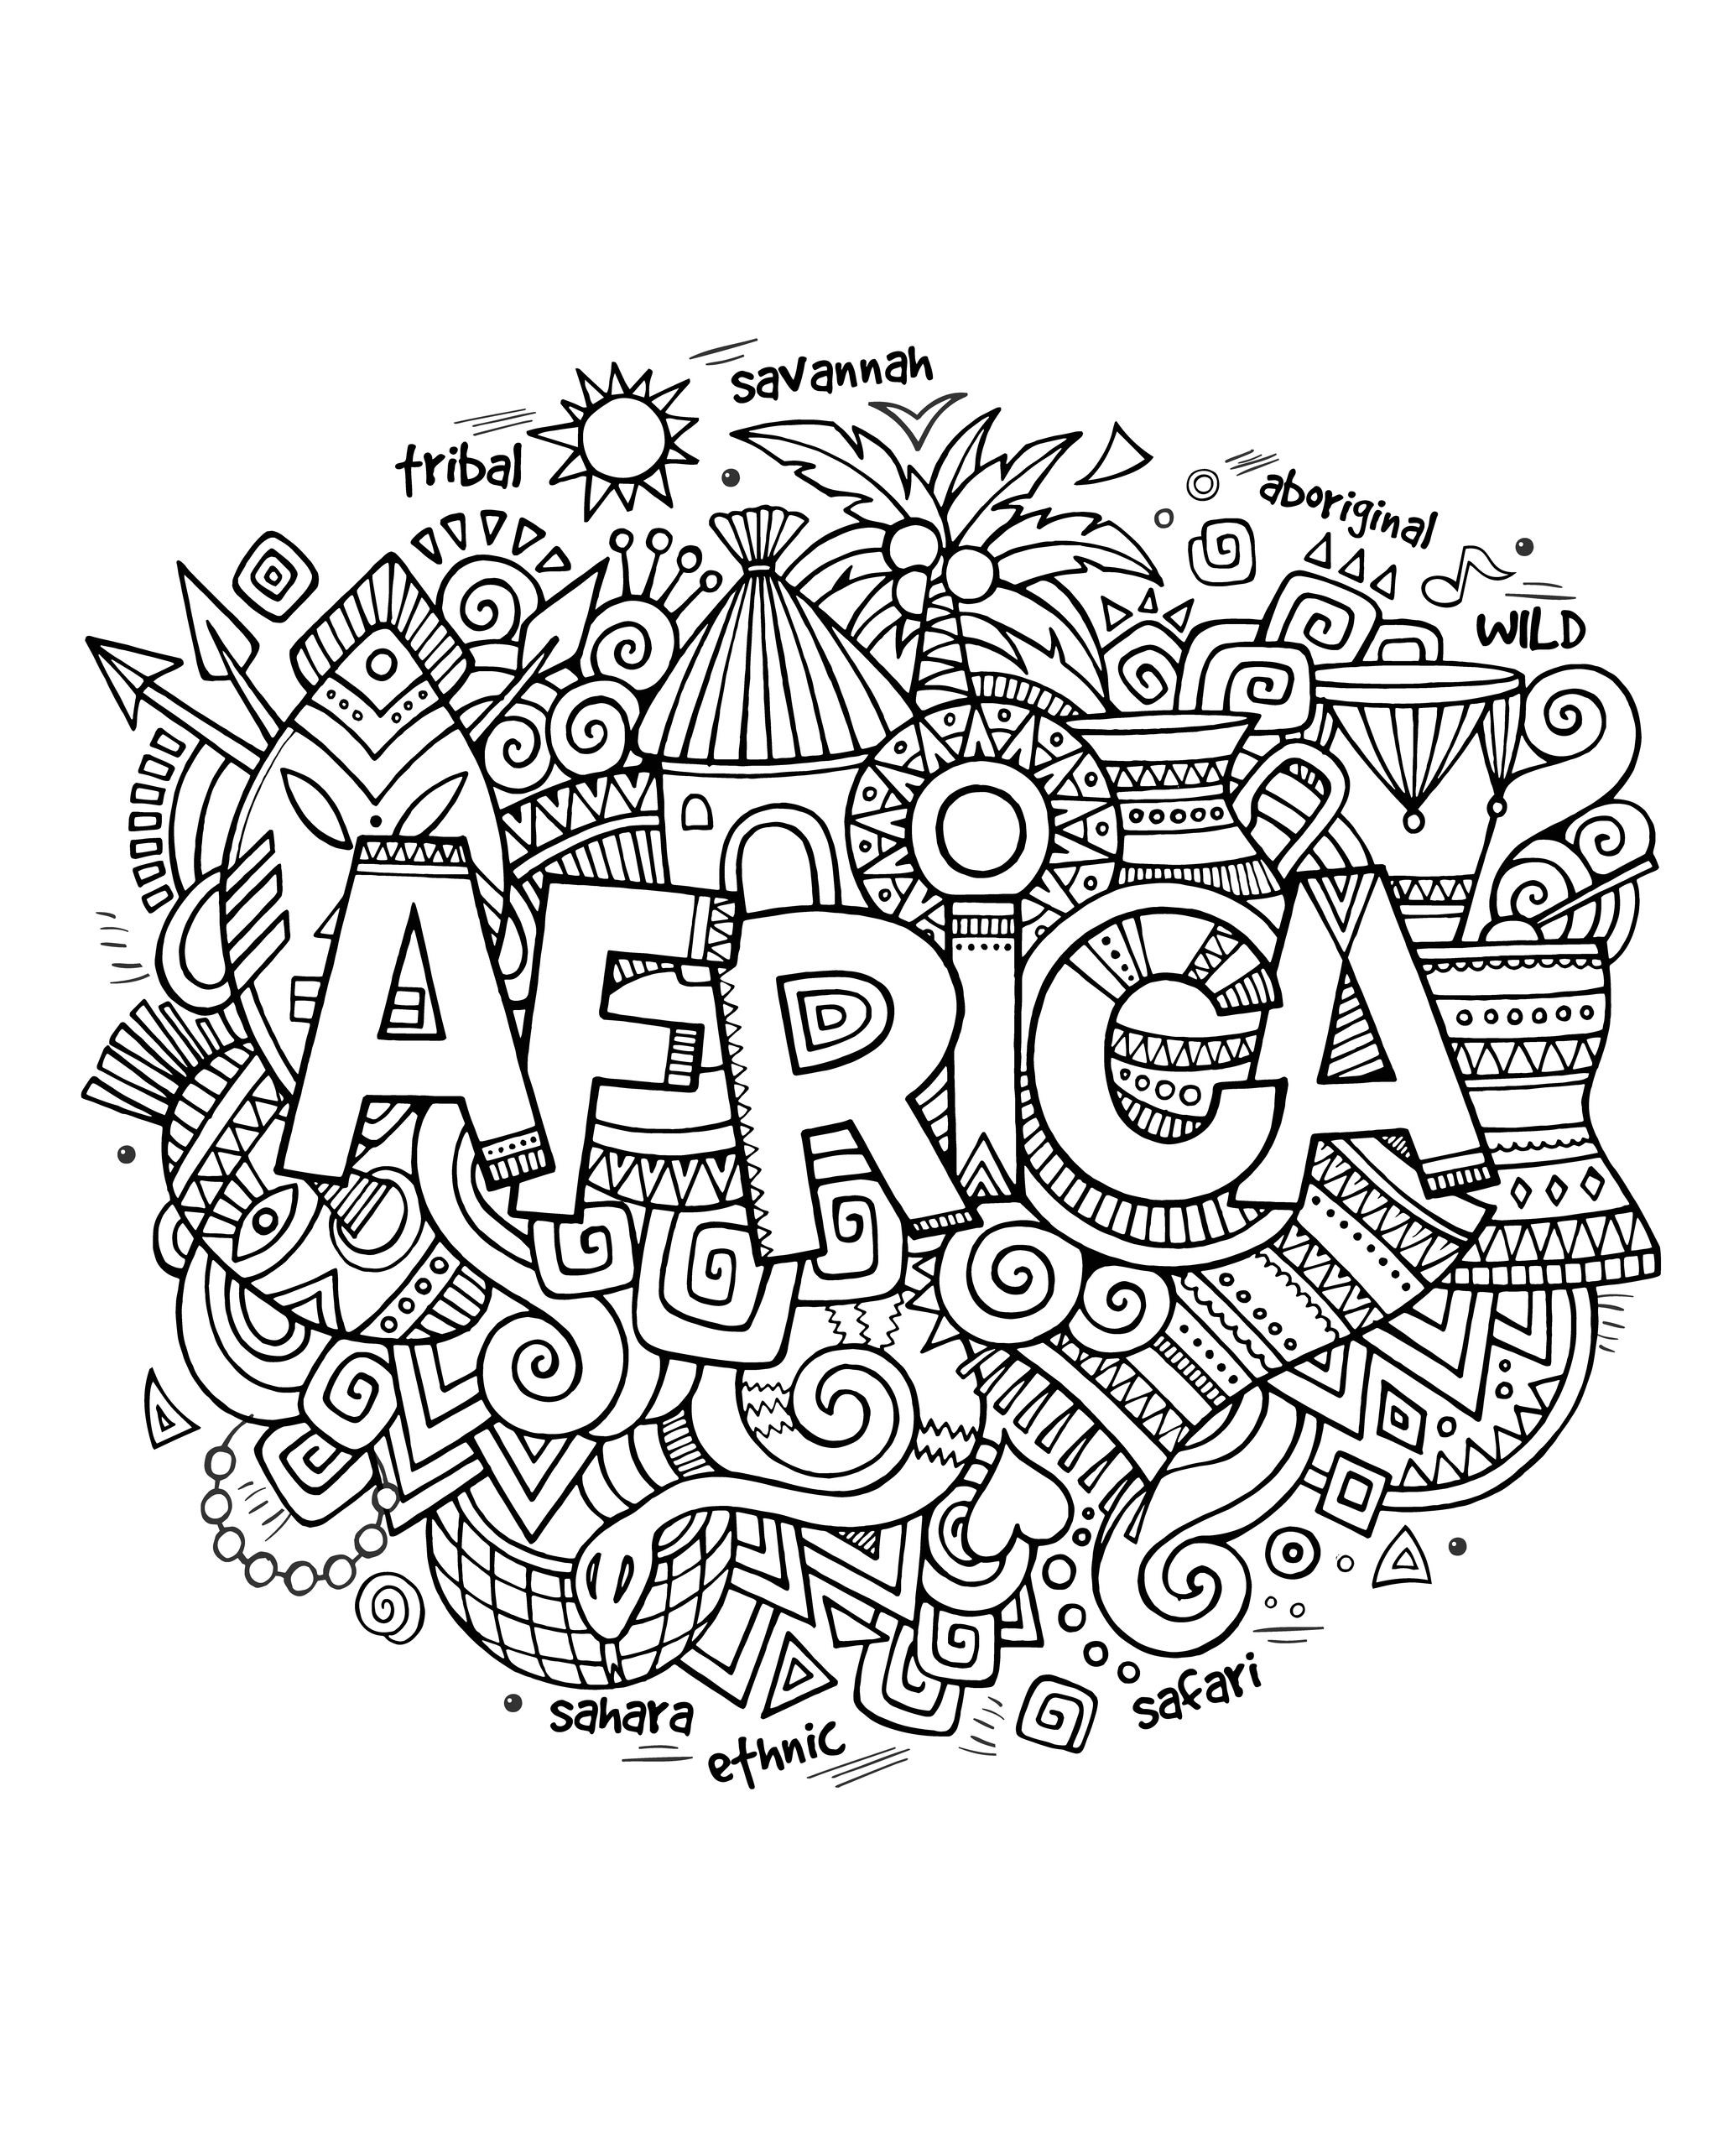 Drawing with the word 'Africa' and a lot of symbols of this continent around